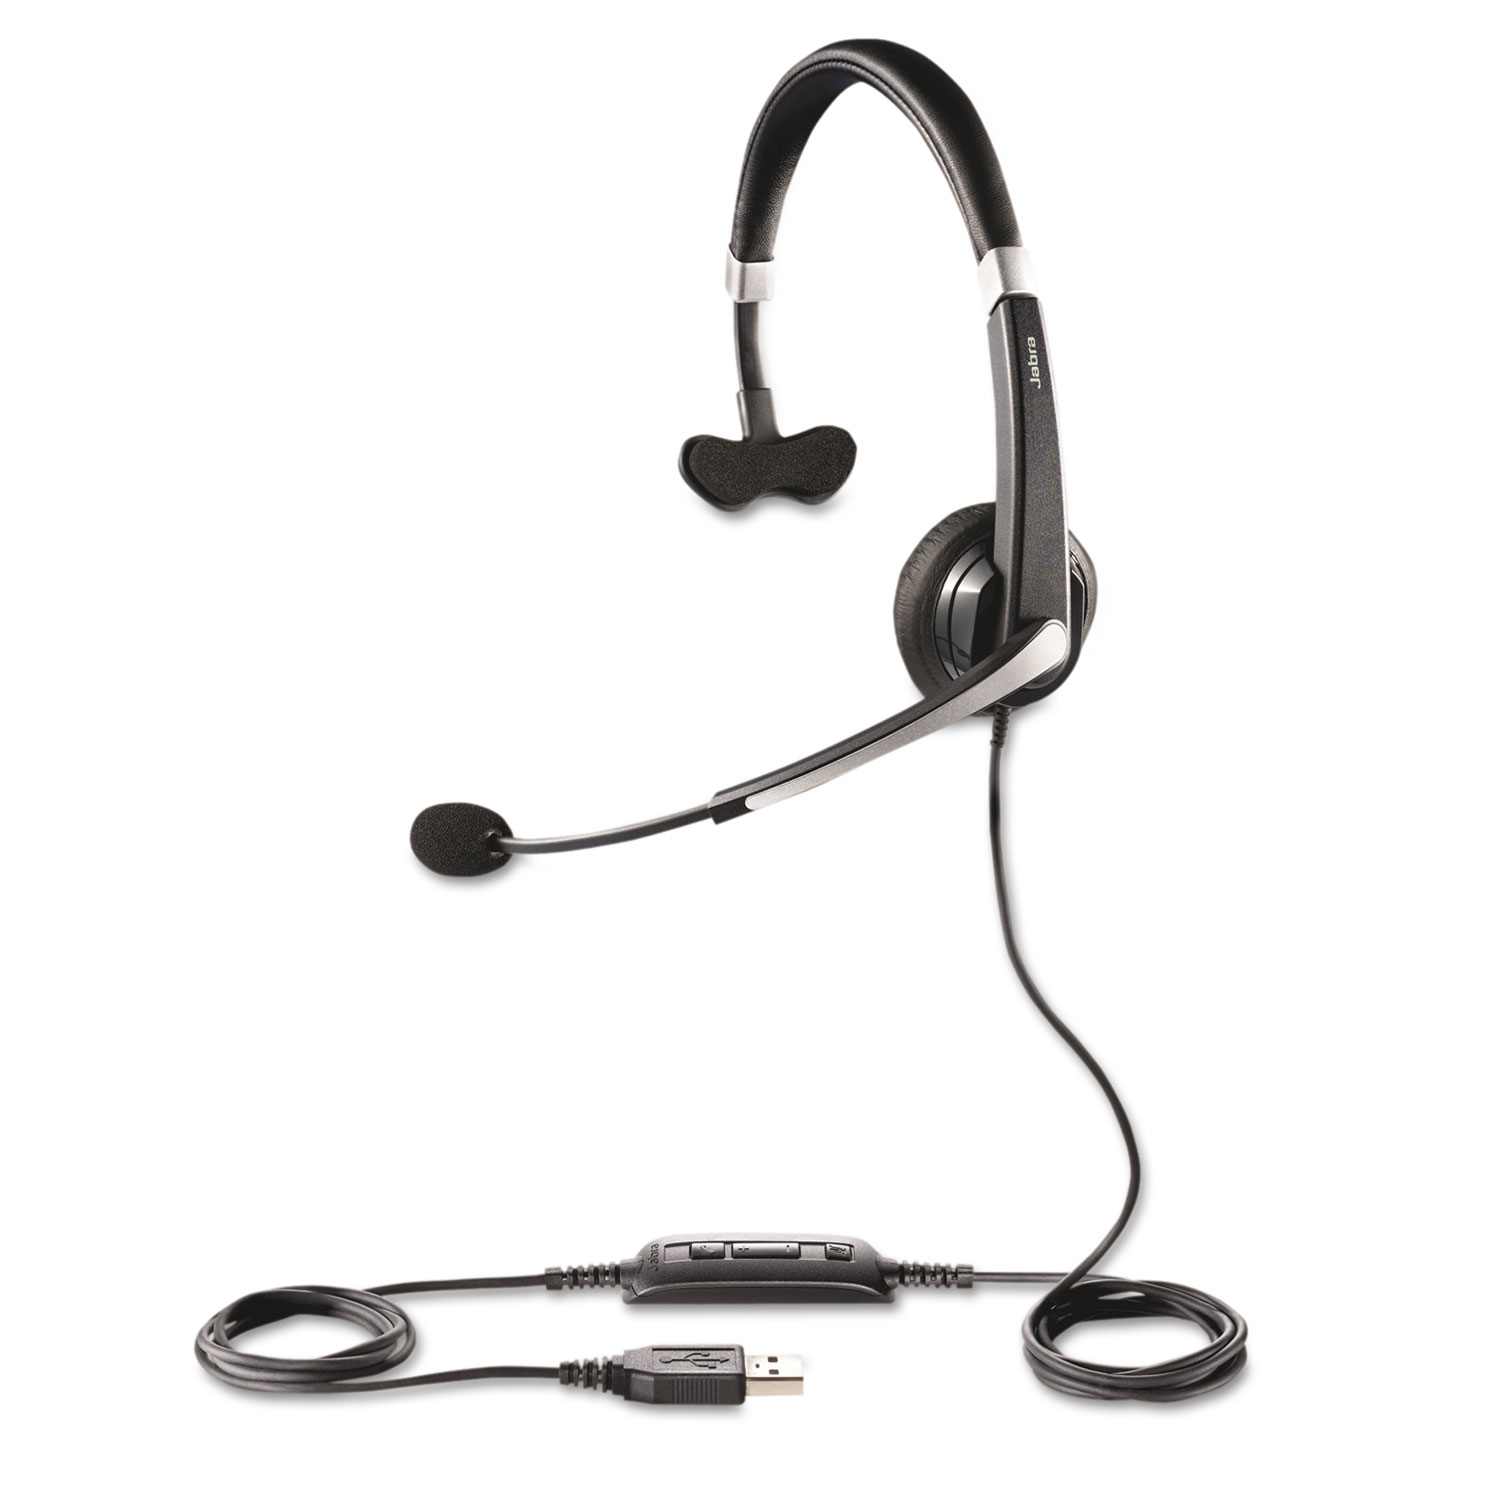 UC Voice 550 Monaural Over-the-Head Corded Headset, Microsoft Certified